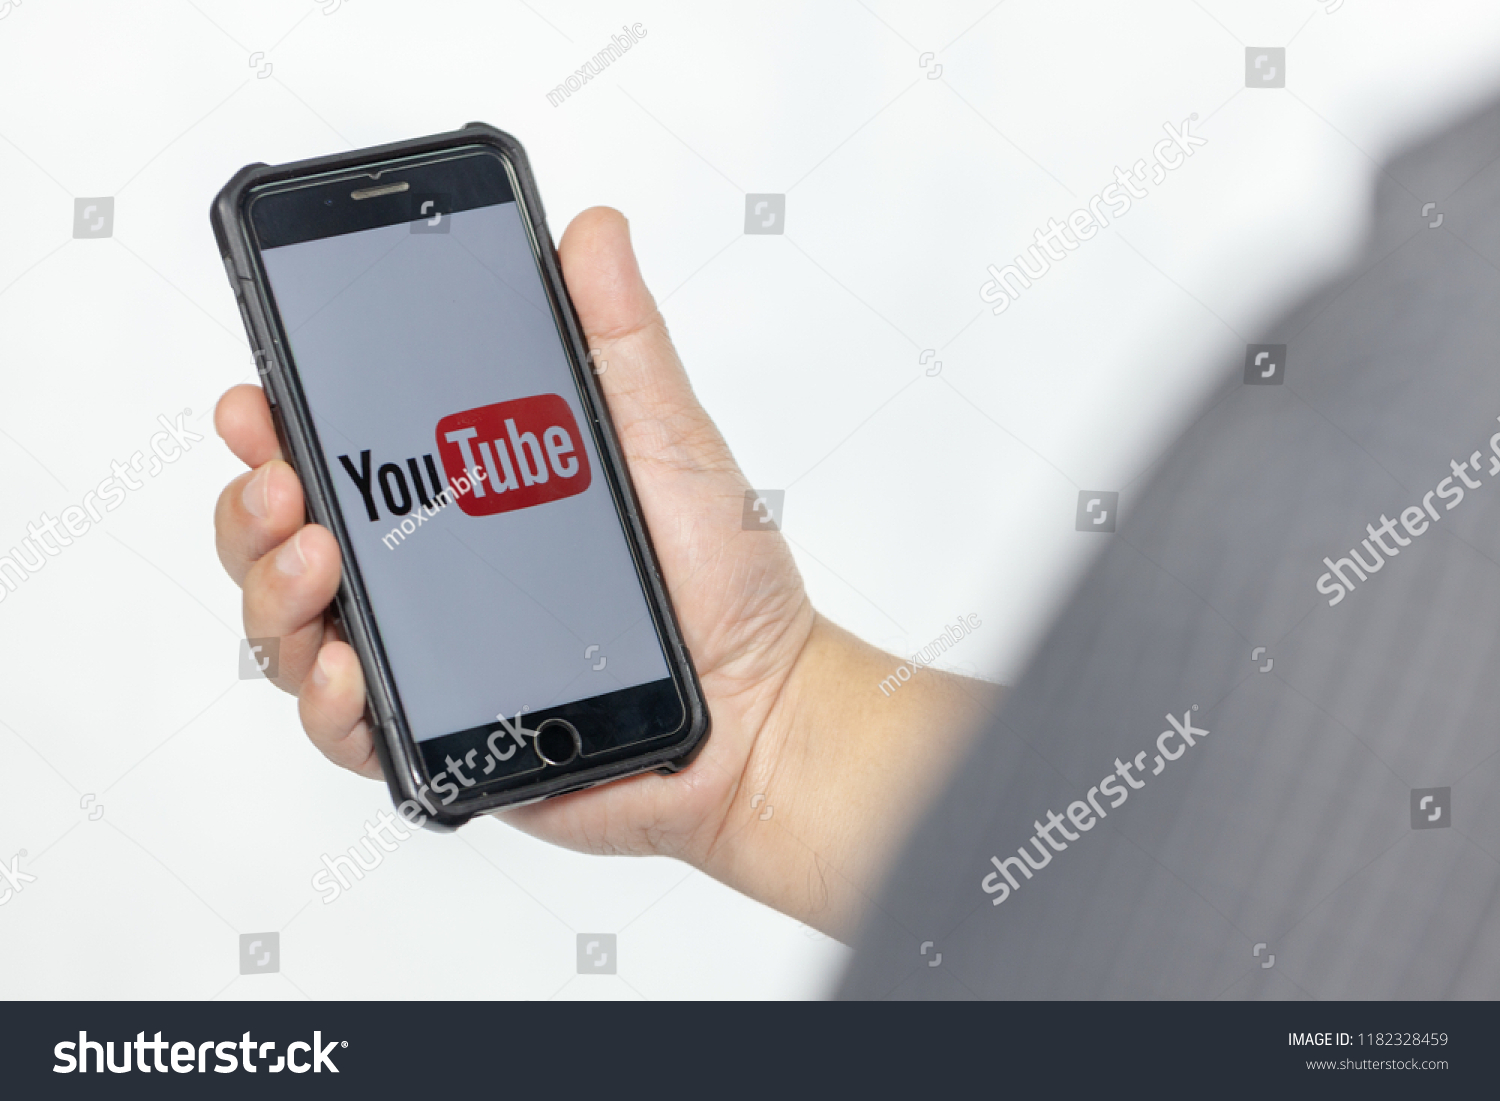 PATHUMTHANI, THAILAND - SEPTEMBER 18, 2018: hand holding iphone7 plus mobile phone with youtube icon application #1182328459